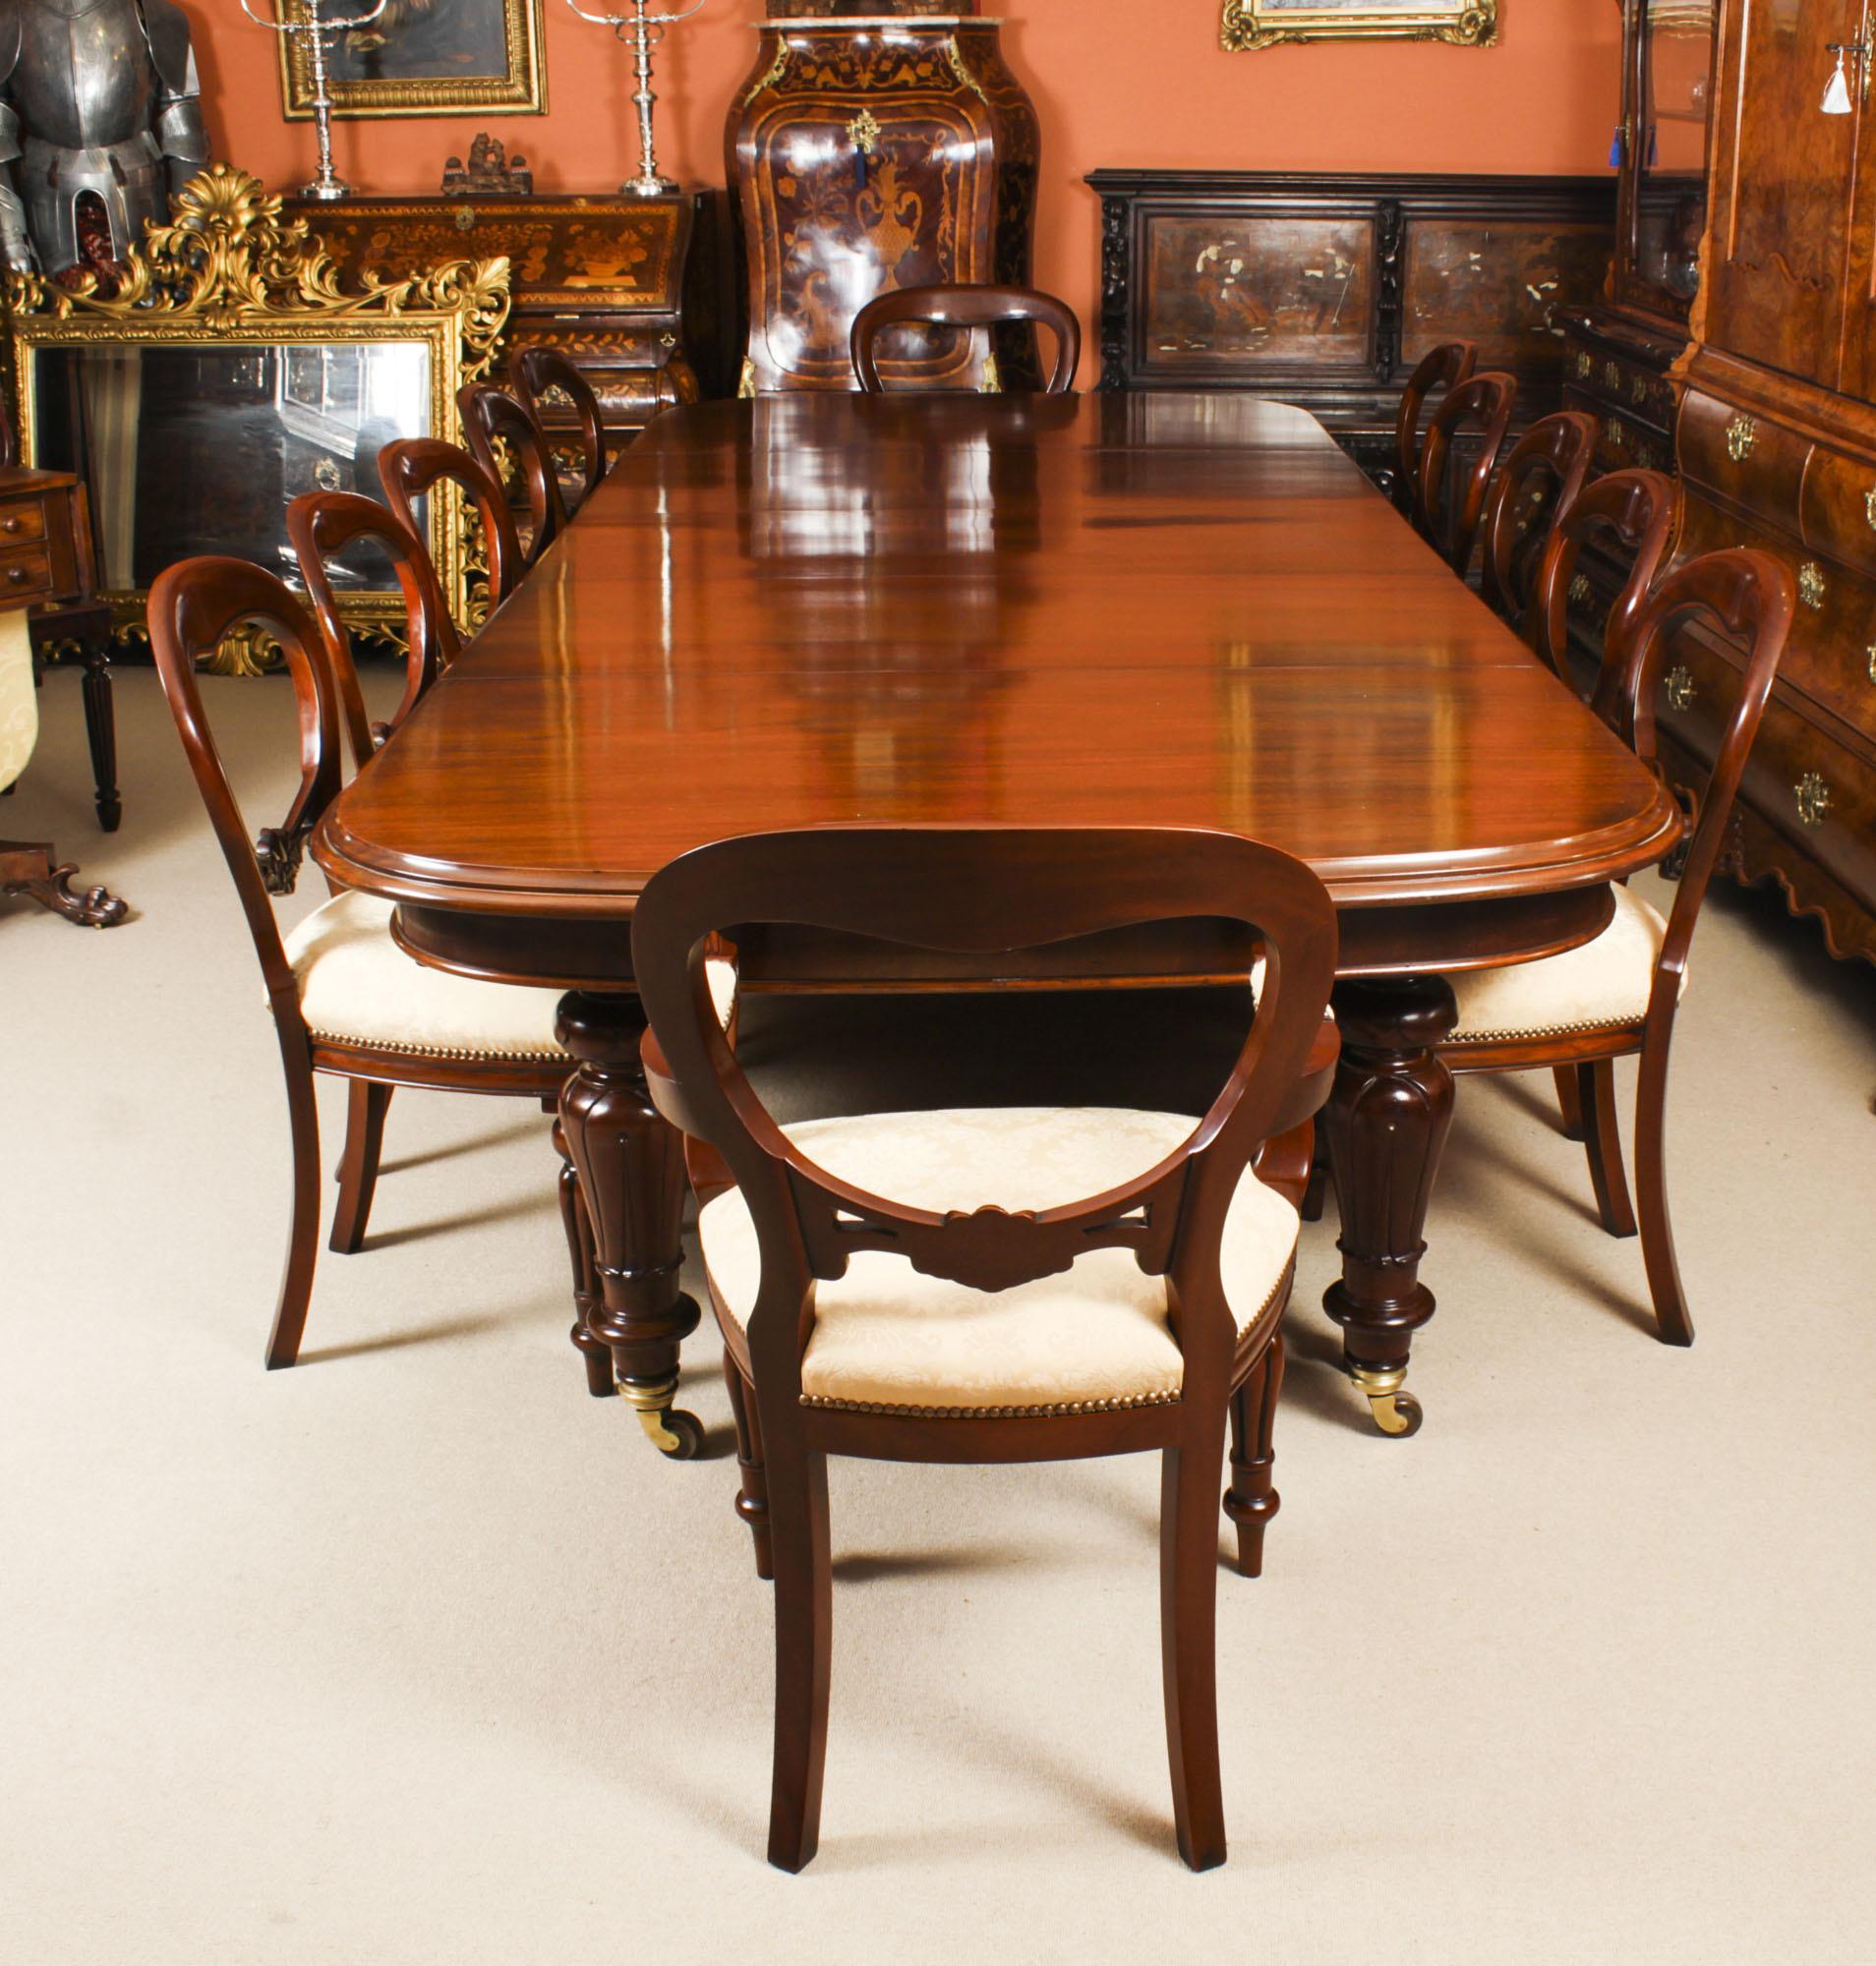 This is a magnificent antique Victorian mahogany D-end dining table C1850 in date and 12 baloon back chairs.
 
This beautiful table is in stunning solid flame mahogany and can seat twelve diners in comfort. It has three original leaves, 2x 60cm